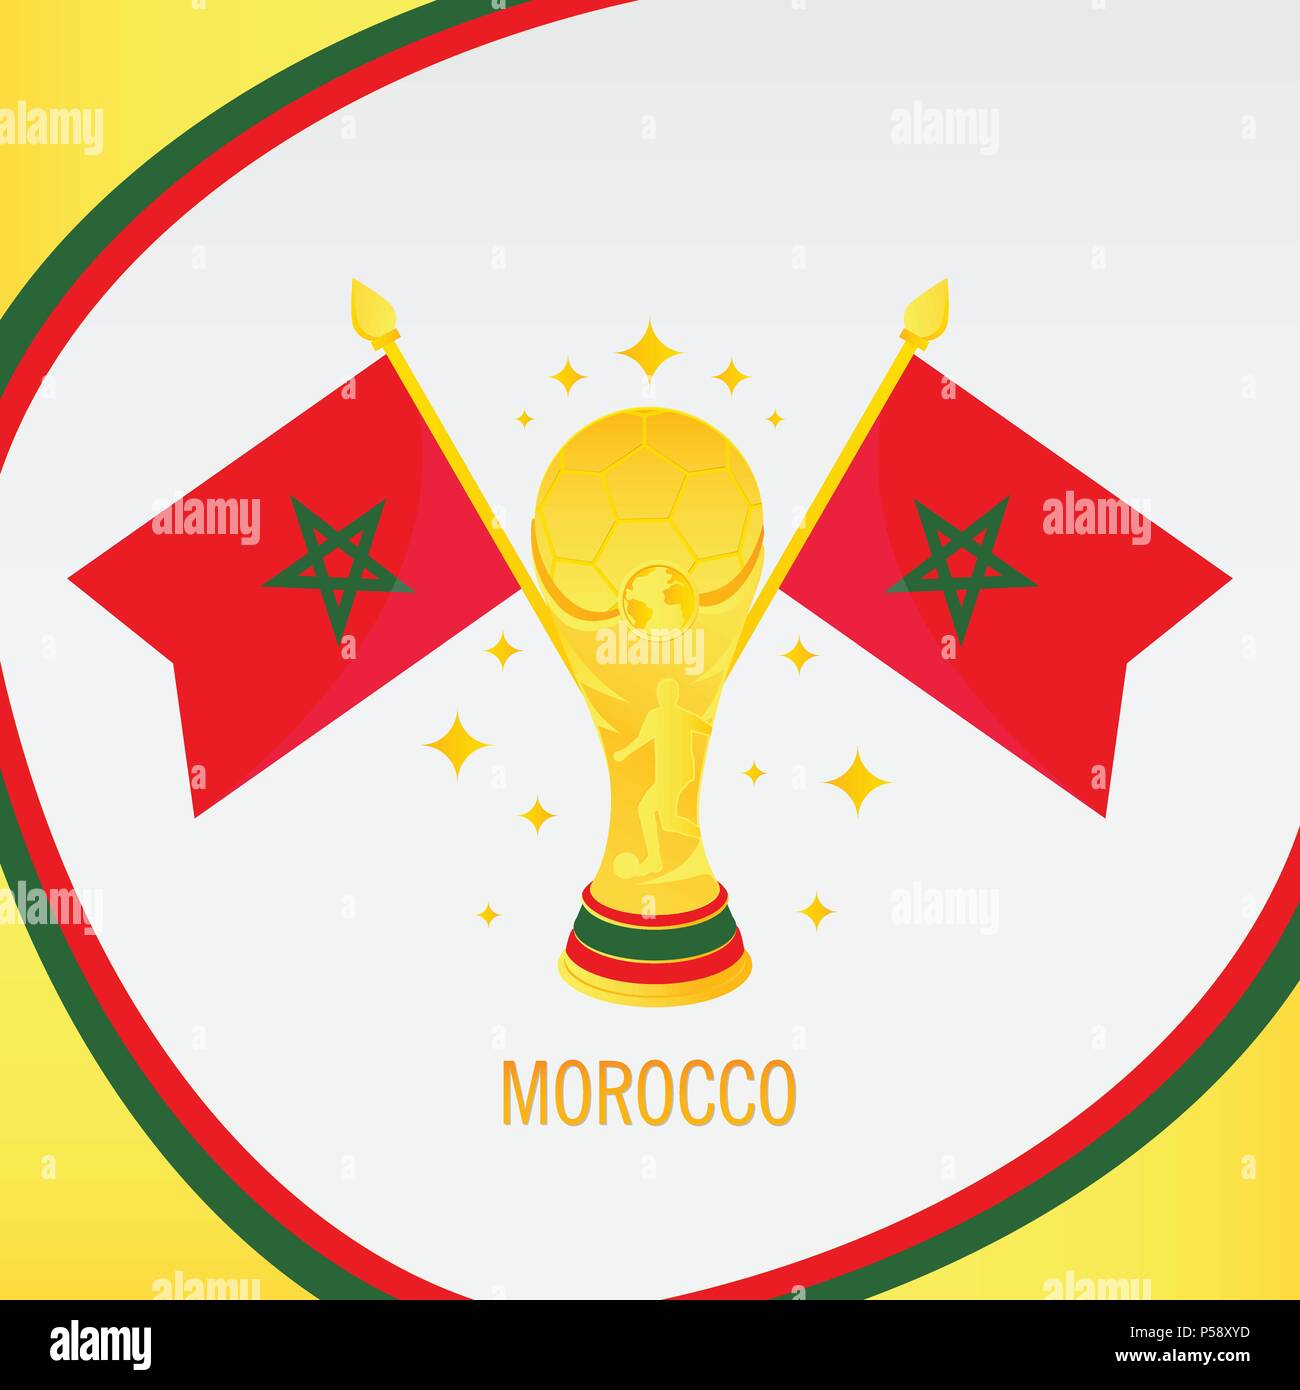 Morocco Football Champion 2018 - Flag and Golden Trophy / Cup Stock Vector